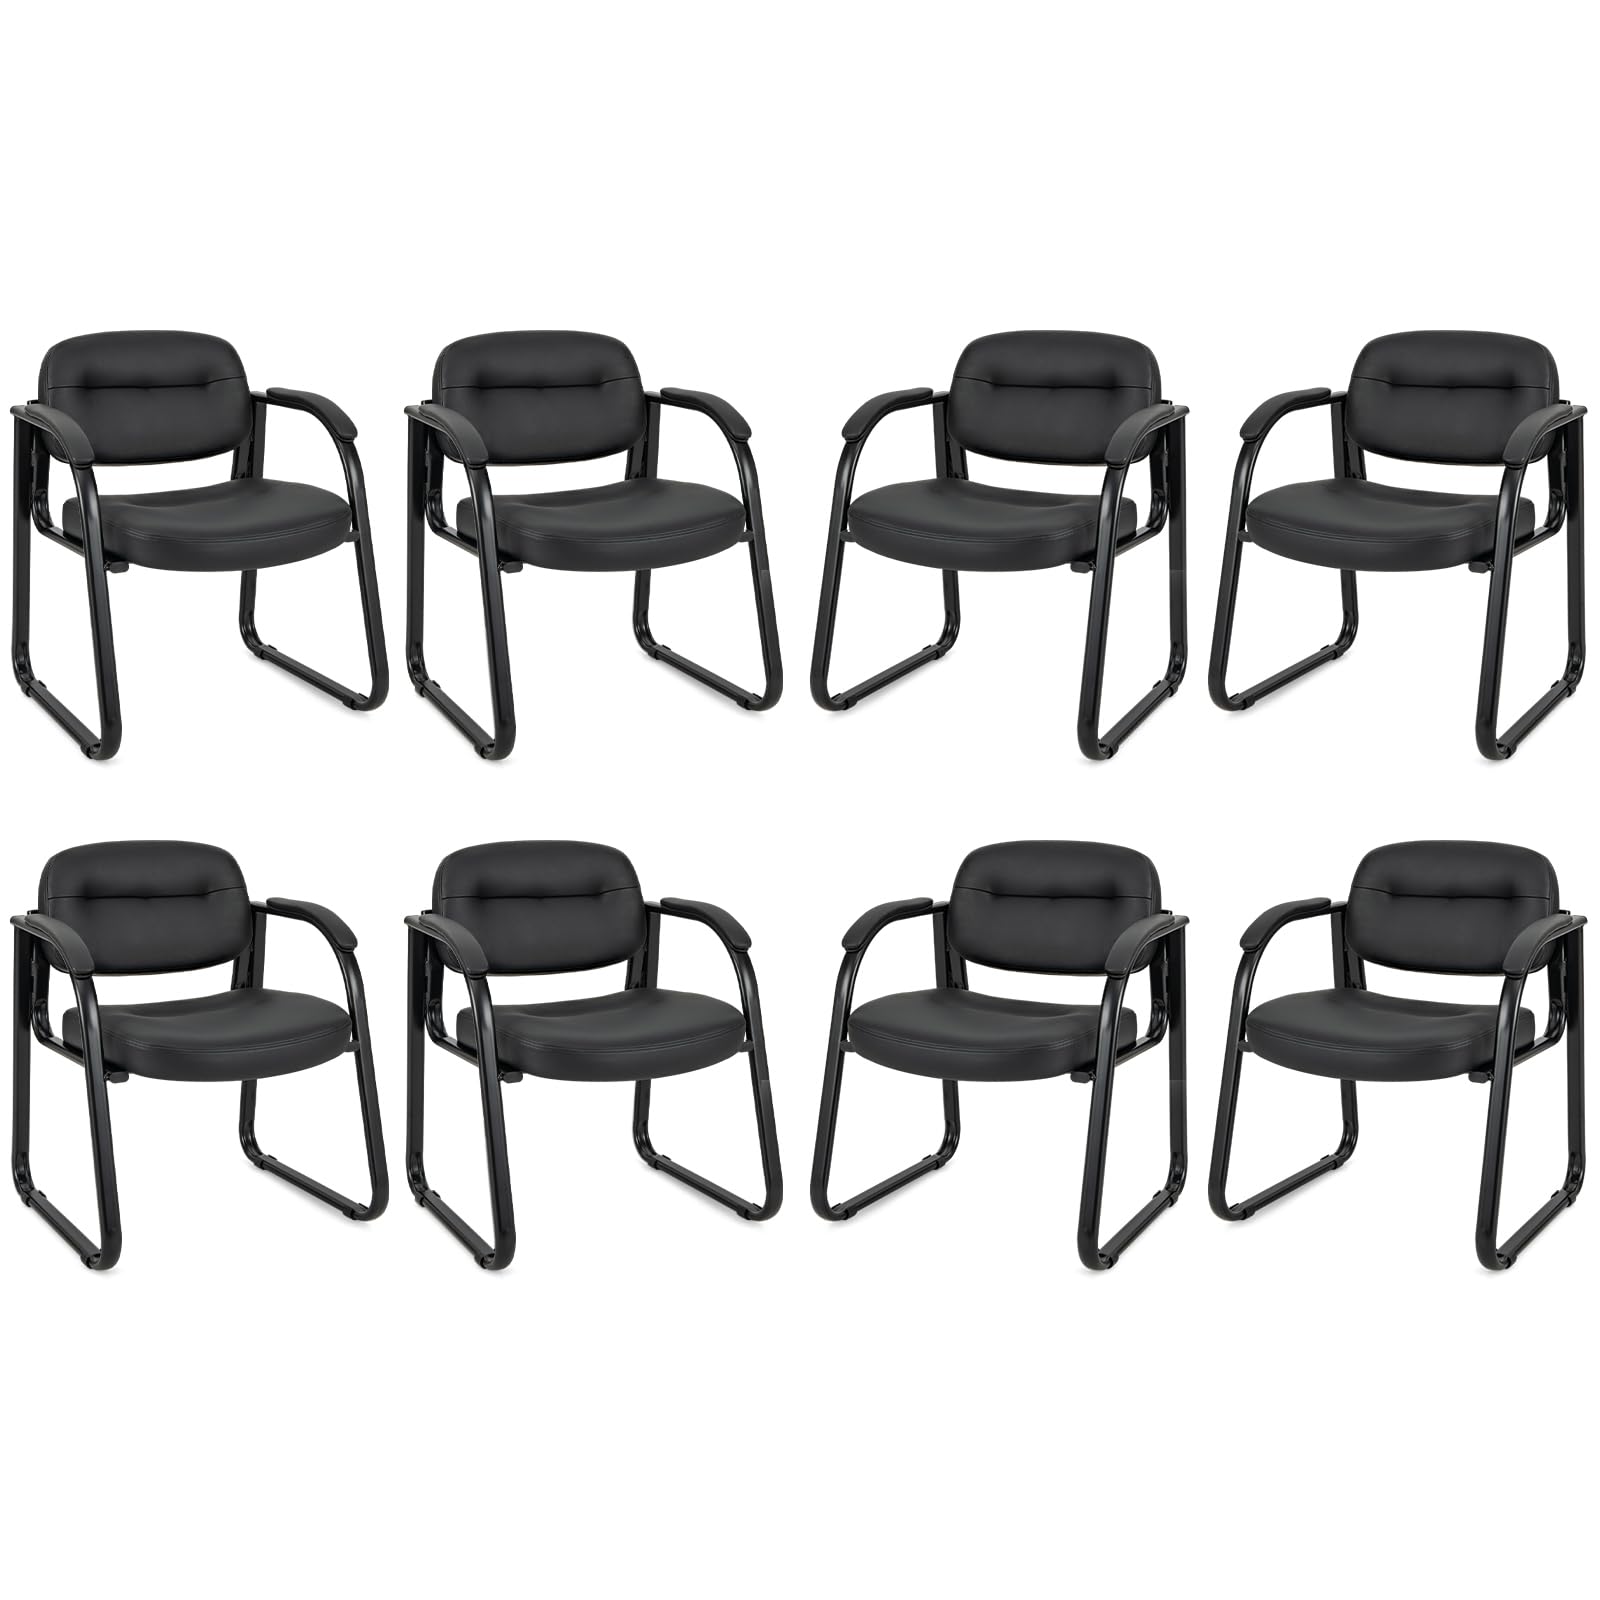 Giantex Waiting Room Chairs Set - Reception Chairs